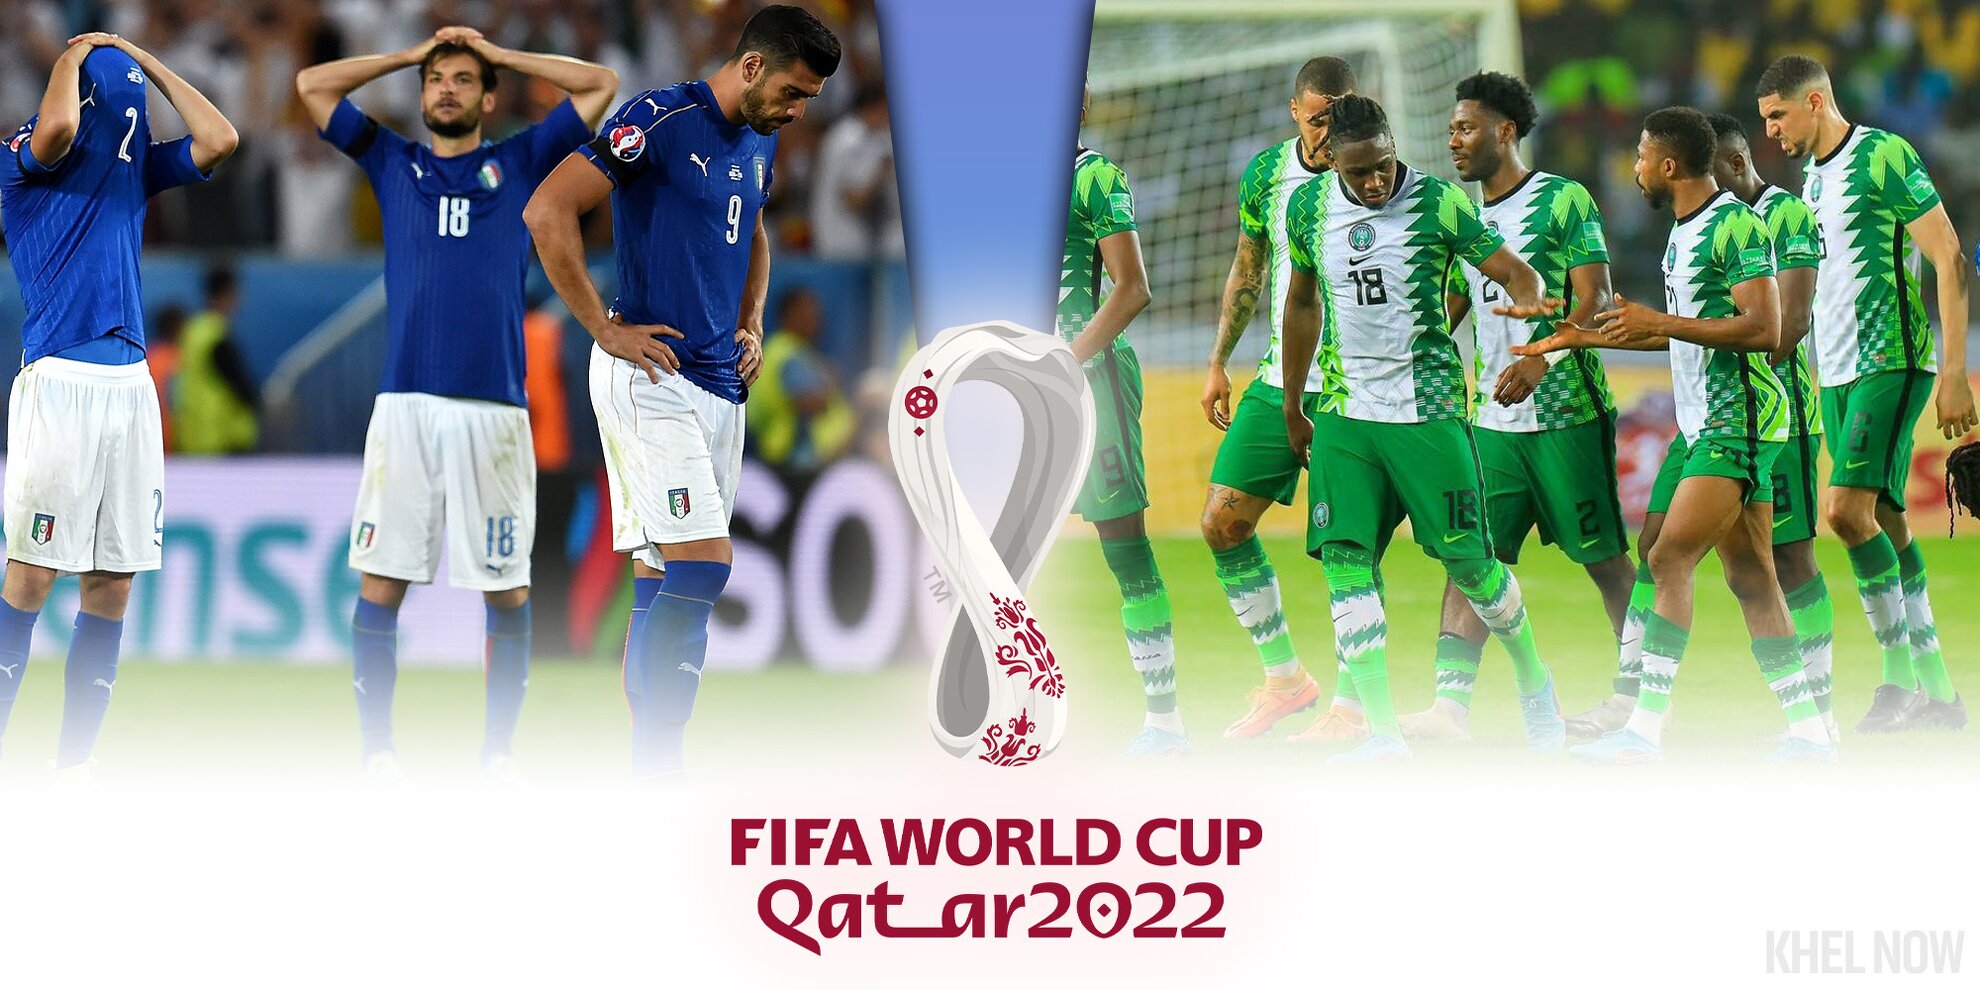 Top five nations who failed to qualify for 2022 FIFA World Cup